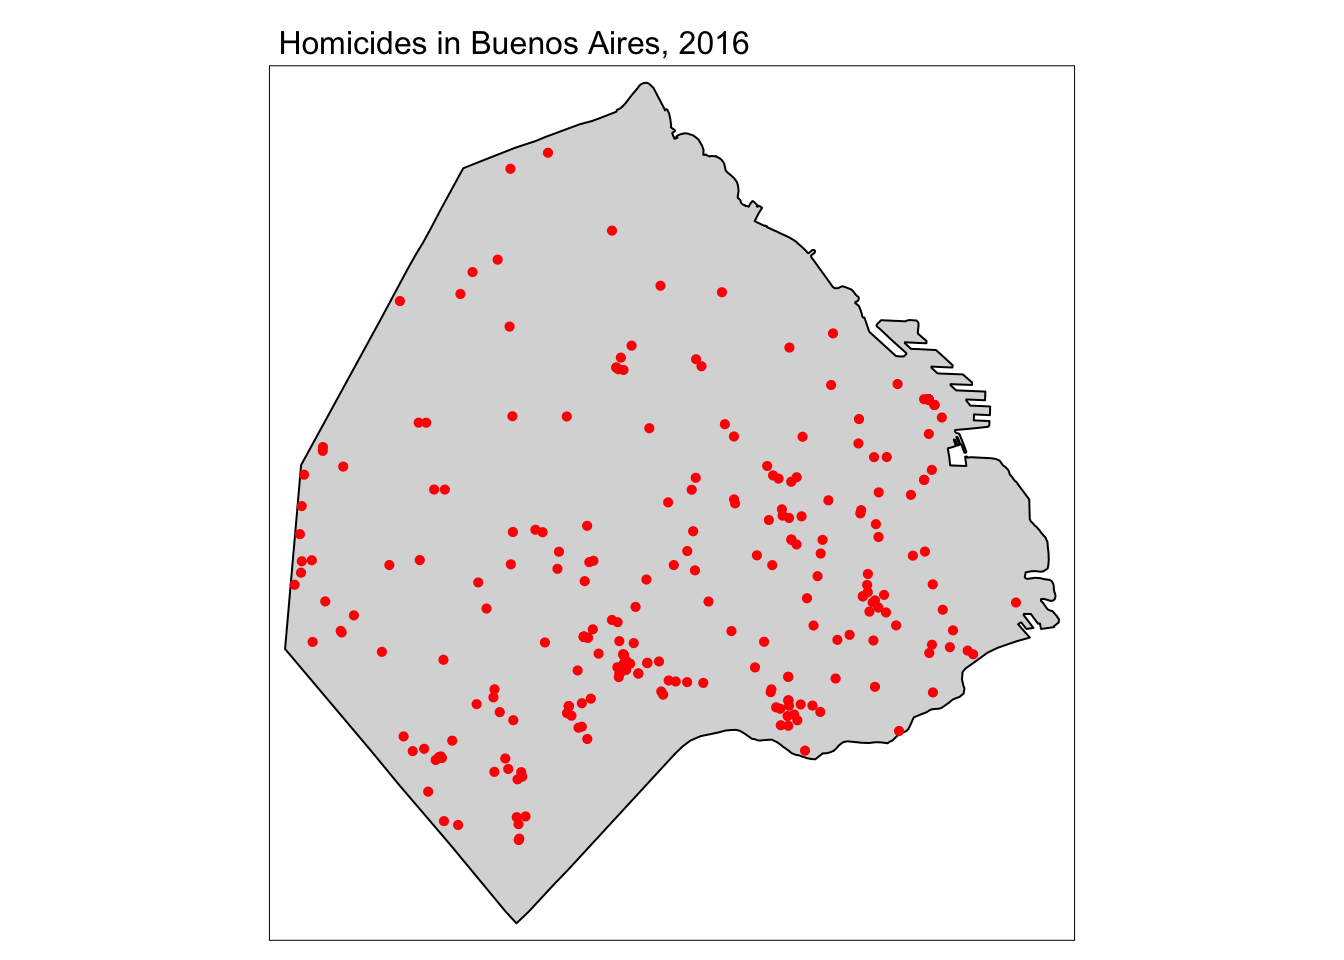 An outline of the border of Buenos Aires, with the interior shaded grey, inside a black square border with the title 'Homicides in Buenos Aires, 2016'. Several red dots are spread out in the interior of the city, with the north half appearing more sparse.